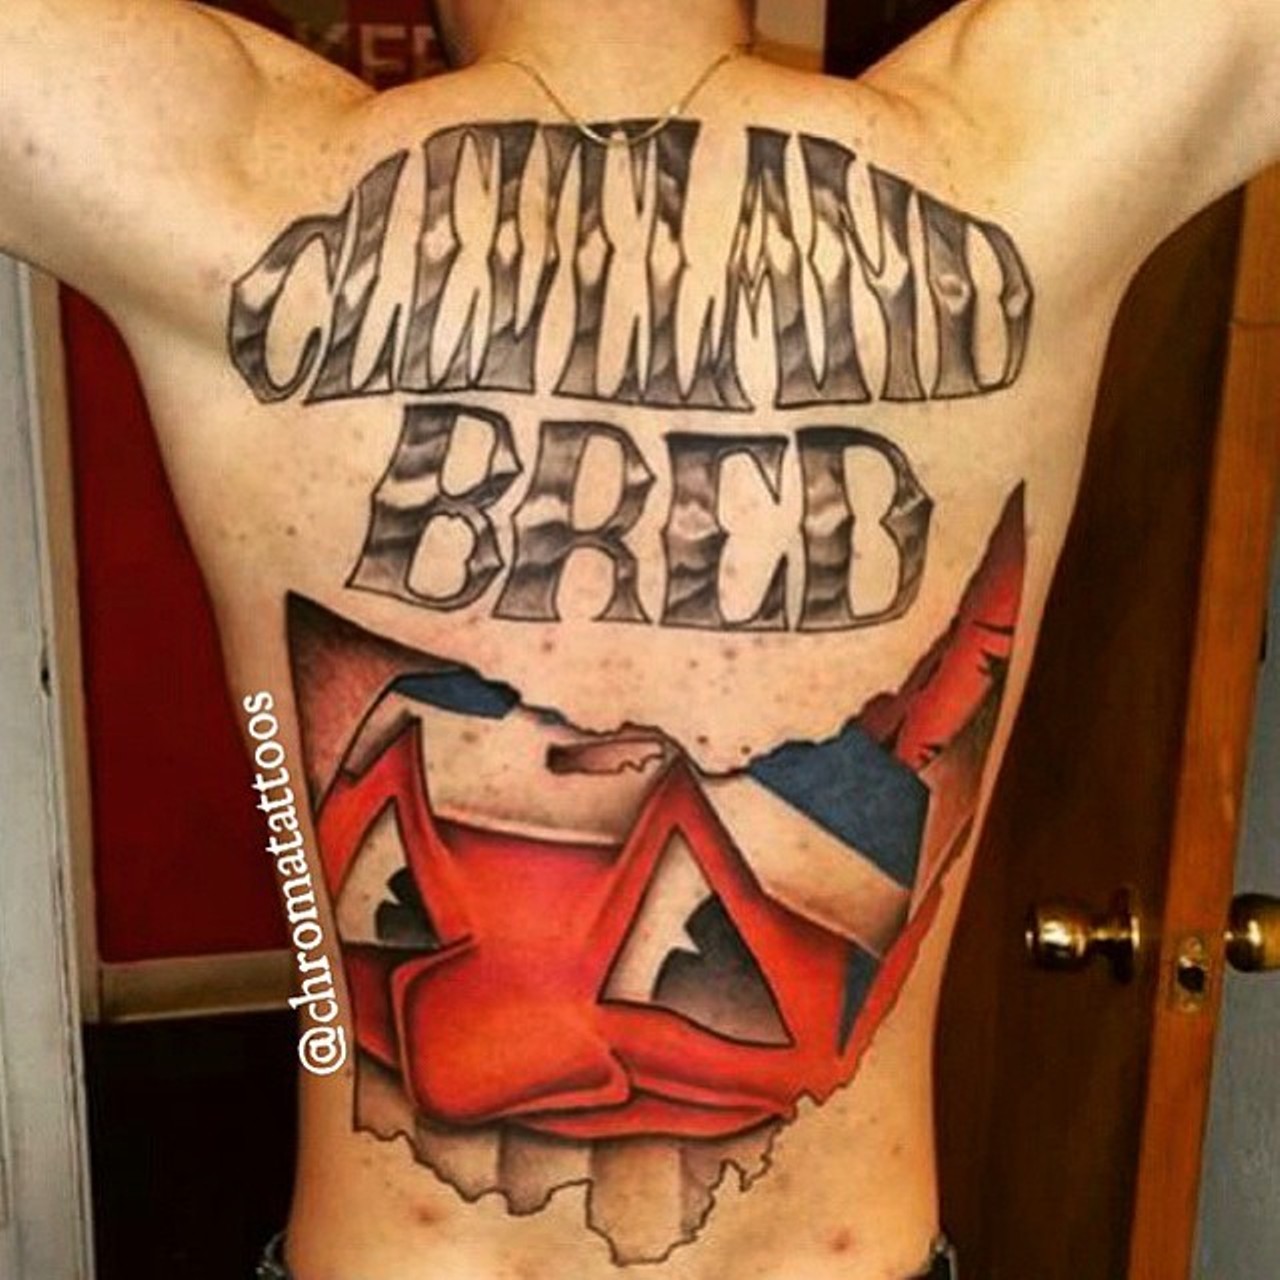 Oklahoma fan gets Baker Mayfield tattoo after retweet from Mayfield Photo